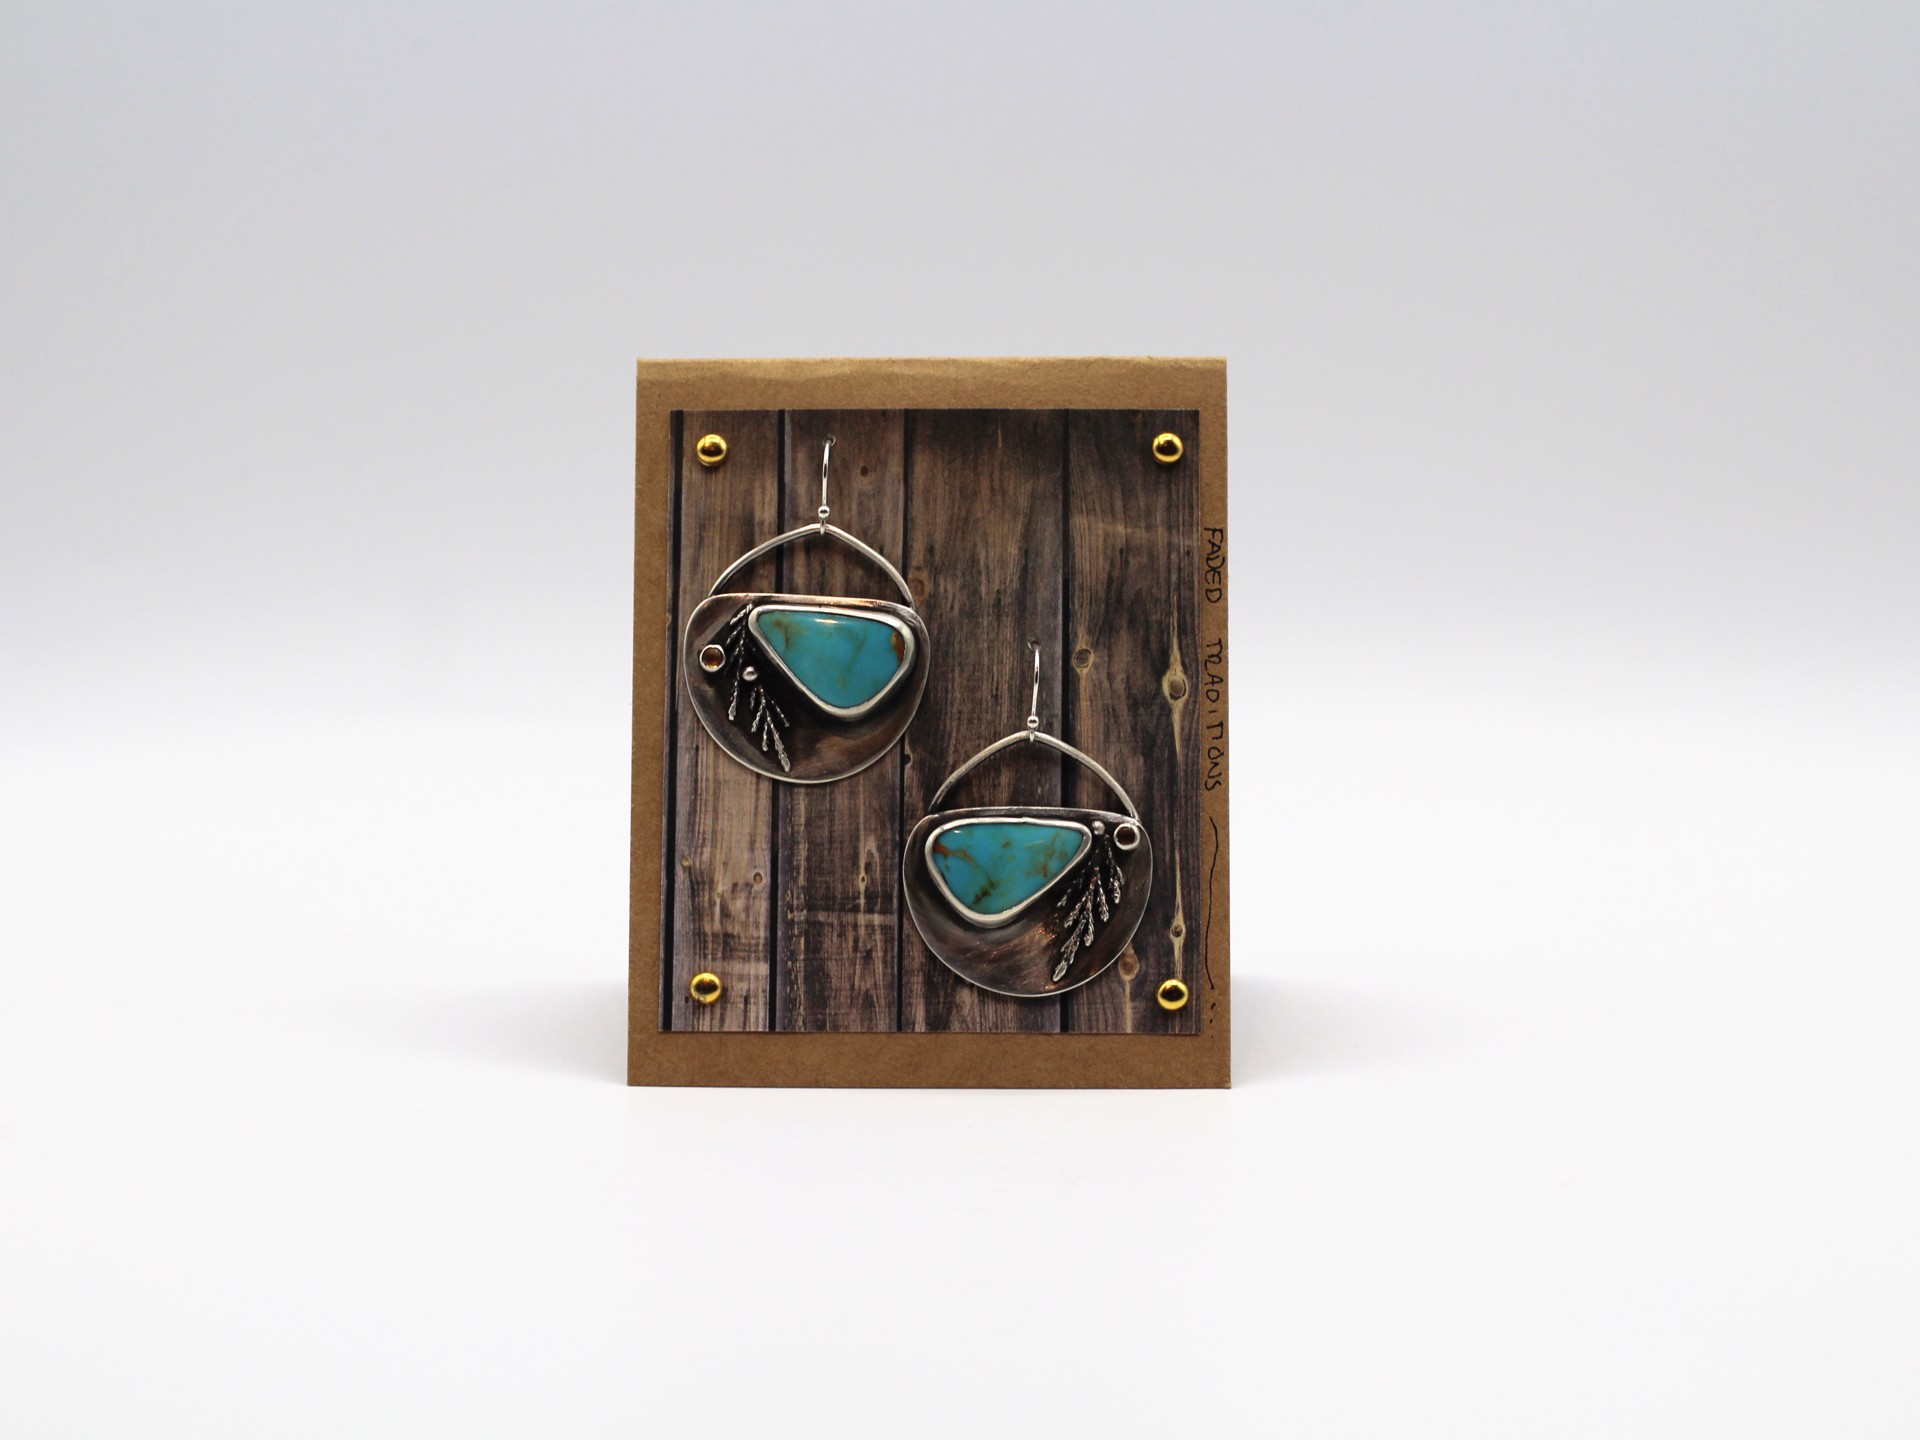 Kingman Turquoise Shield Earrings with Cast Juniper and Citrine by Ashley Hanna